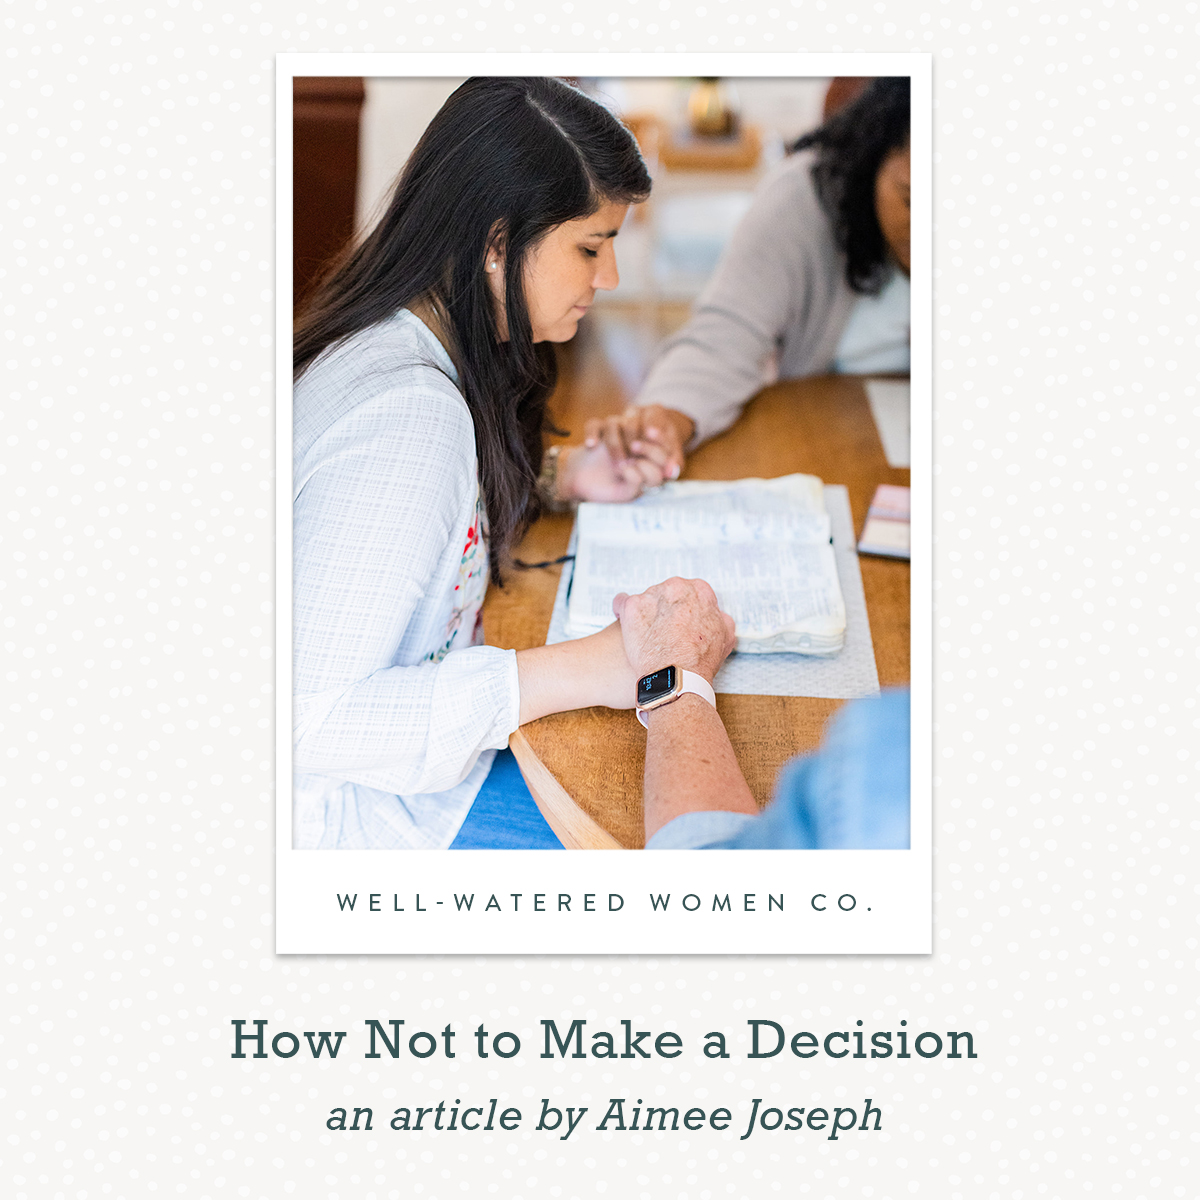 How Not to Make a Decision